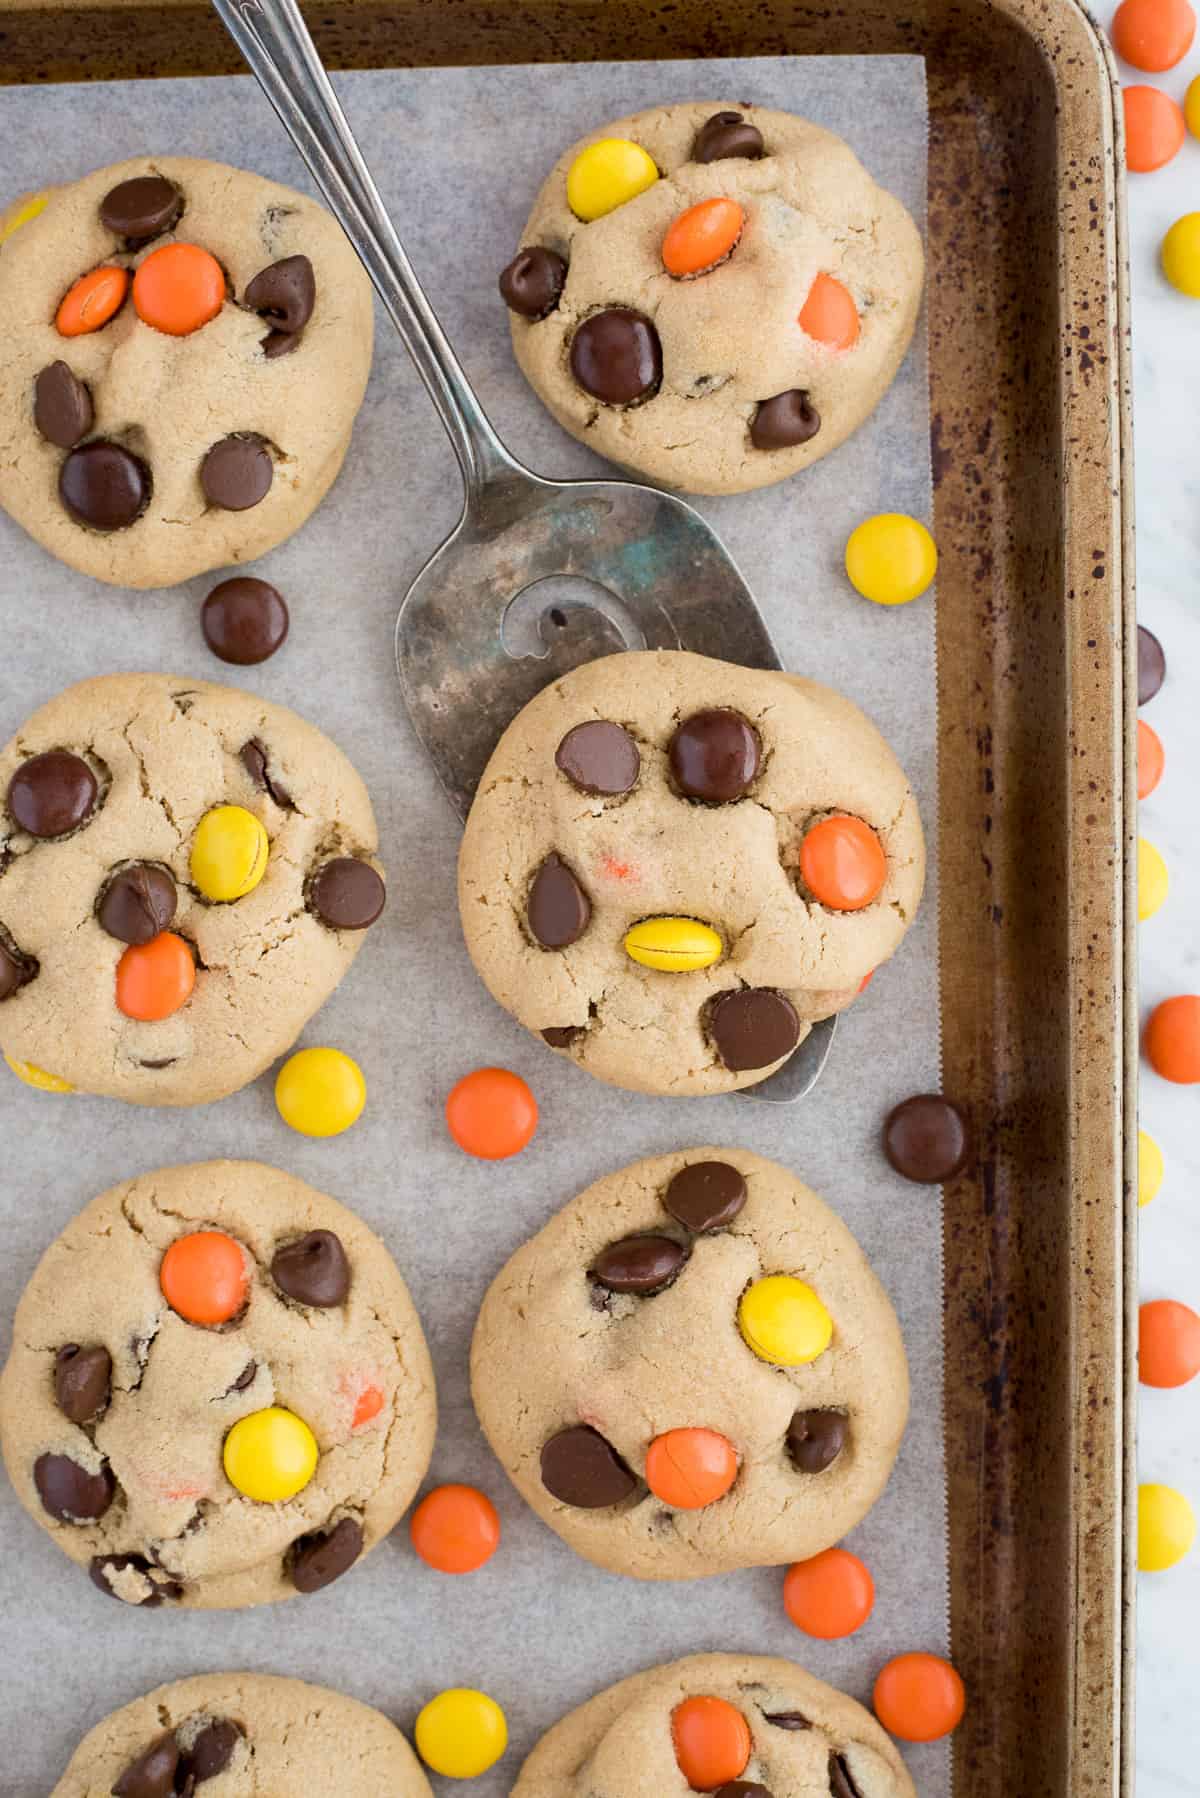 peanut butter cookies with reese's pieces candies and chocolate chips on metal baking sheet